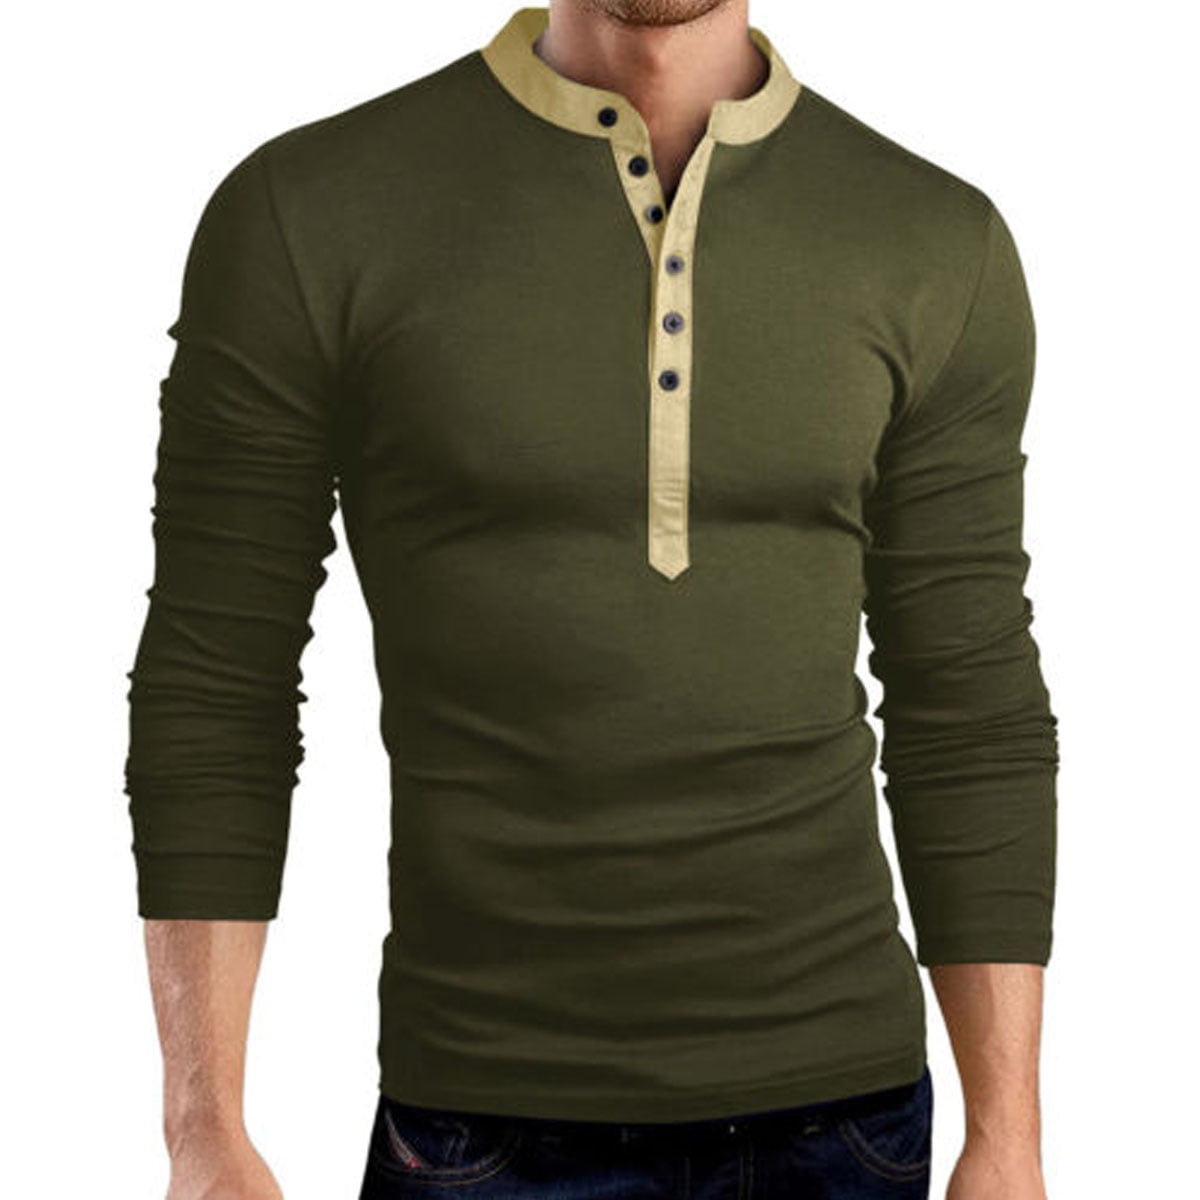 Details about   Men Casual Long Sleeve Tops Blouse V-Neck T-shirts Slim Fit Muscle Basic Tee